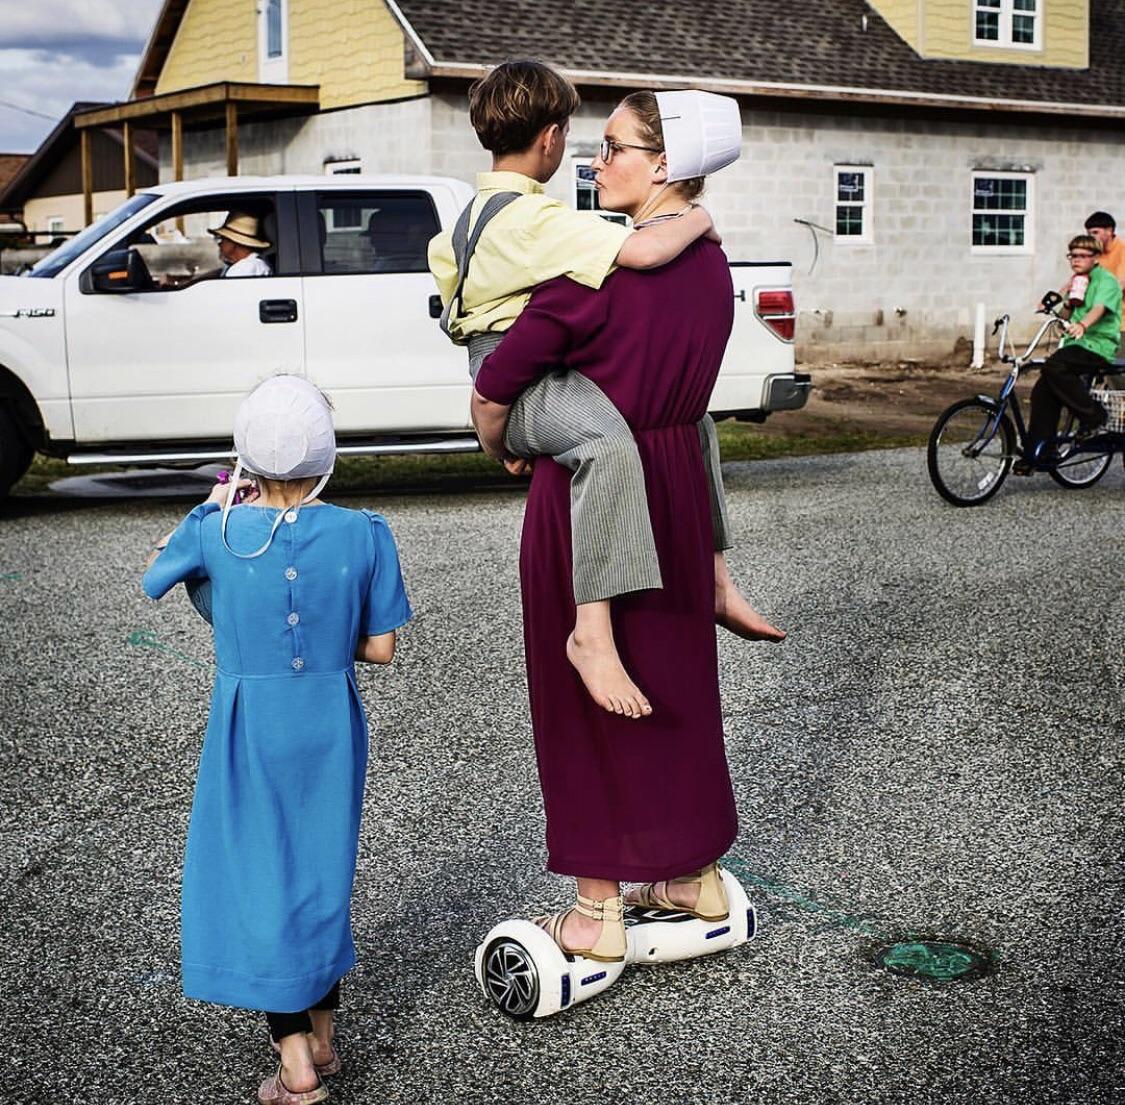 amish woman on hoverboard